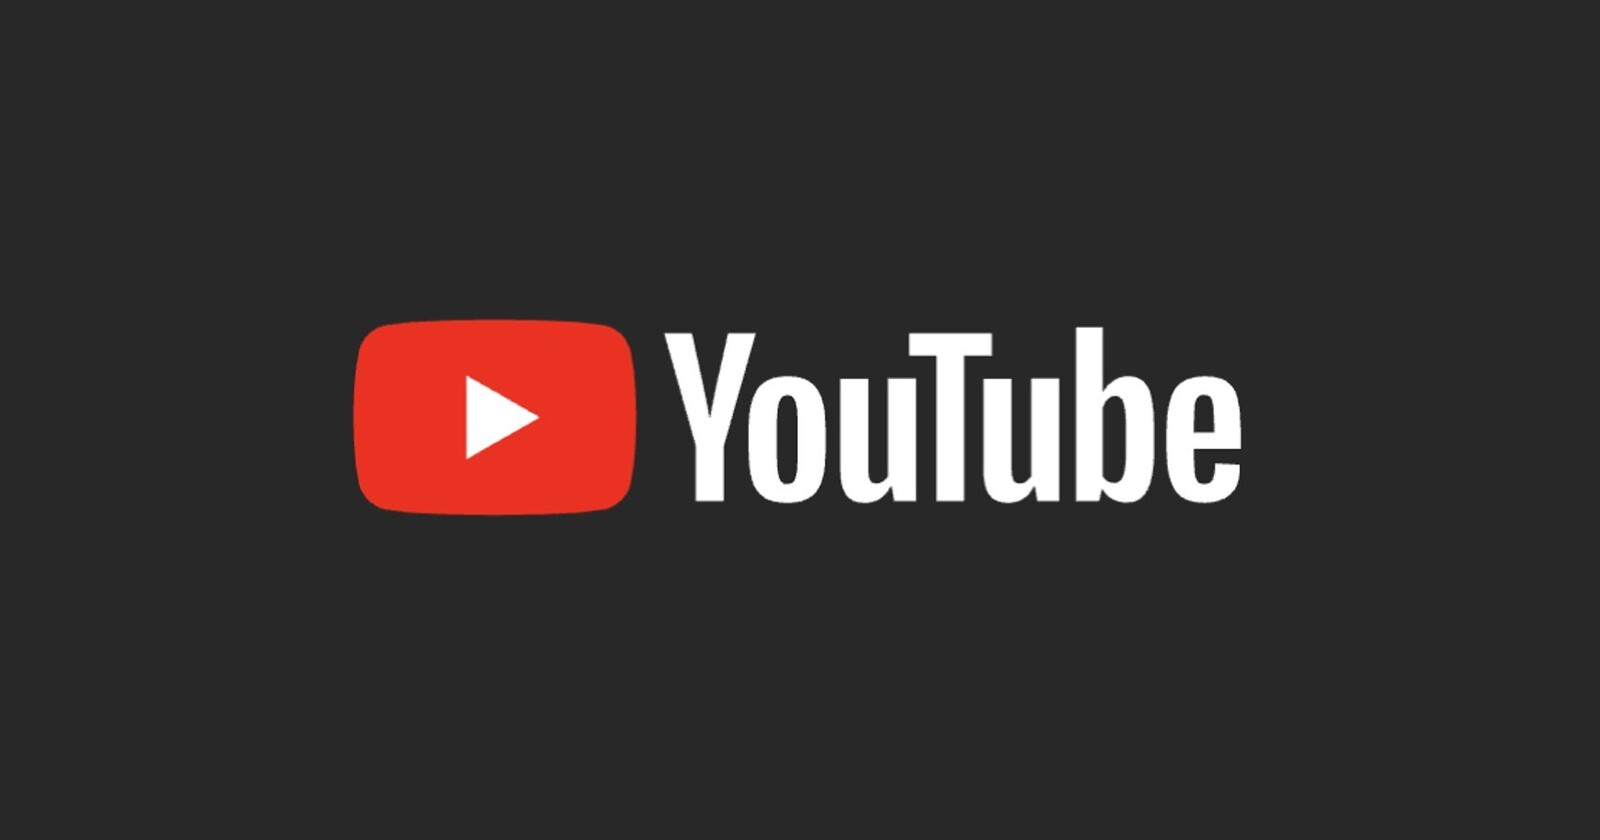 YouTube 'About' & 'Channels' tabs missing? Here's what you need to know